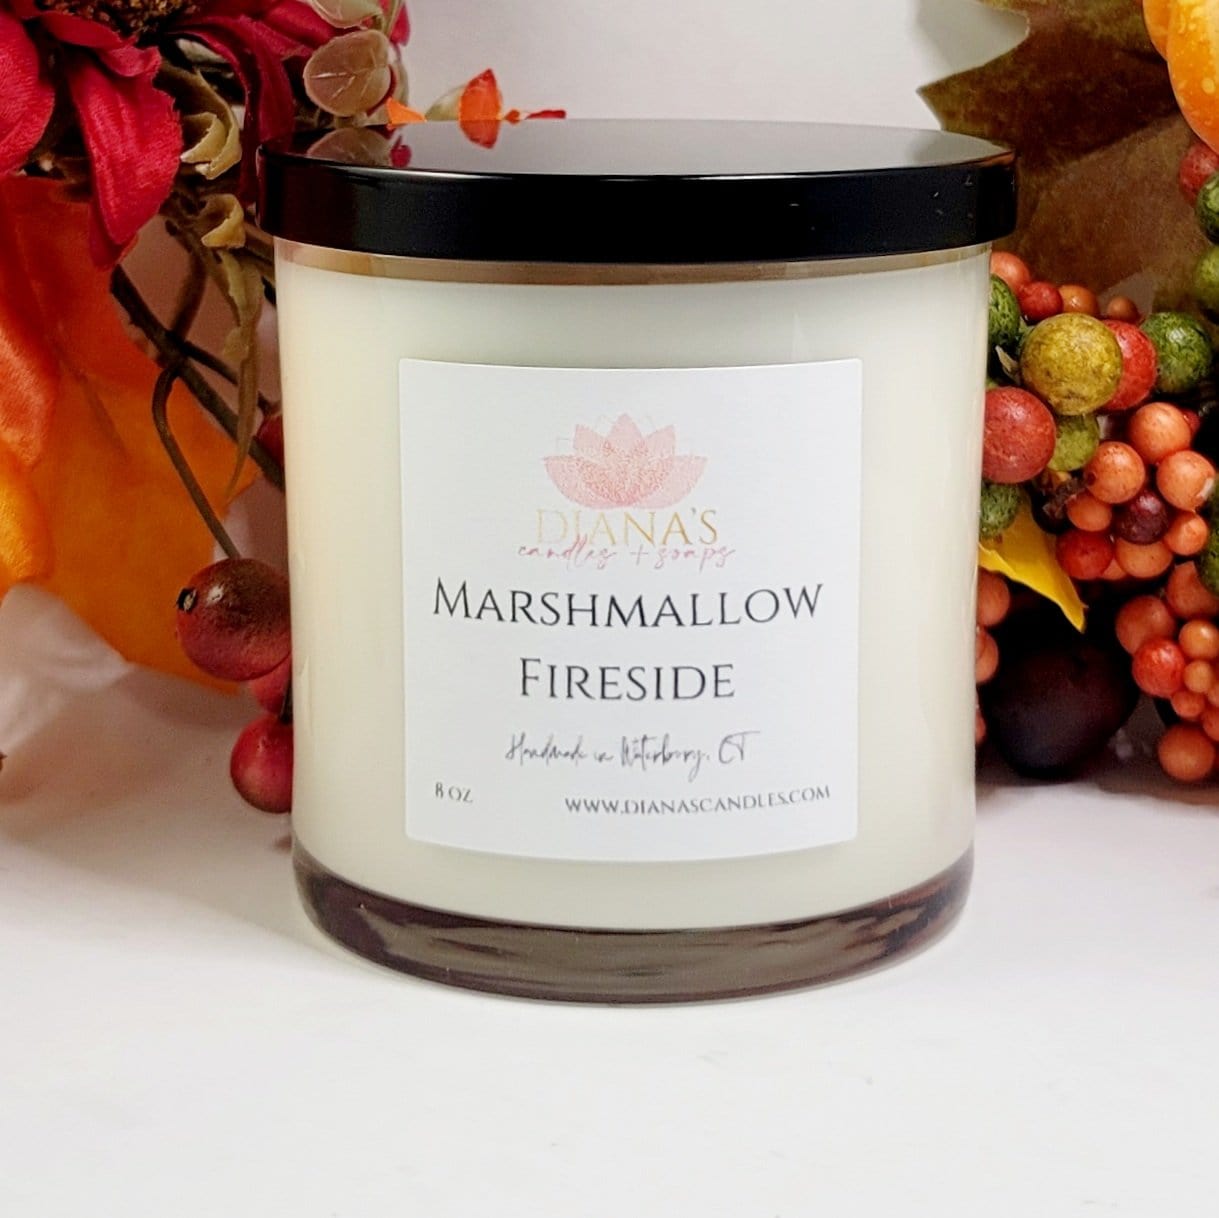 Marshmallow Fireside Candle - Diana's Candles and Soaps 